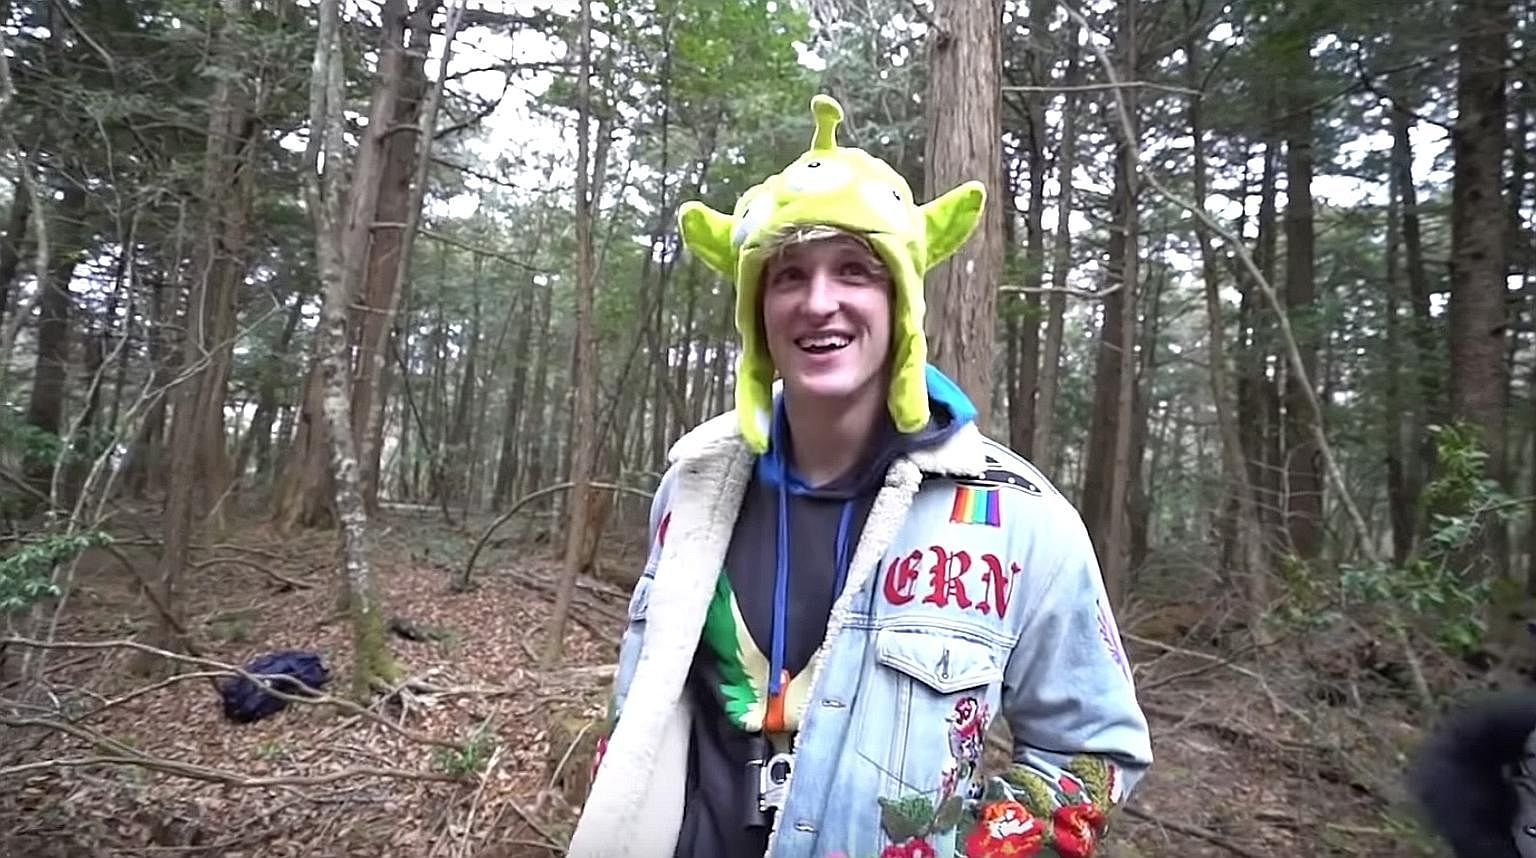 Logan Paul's video of his team exploring Aokigahara's "suicide forest" in Japan took a darker turn when they encountered the body of a man who had hanged himself recently. Adding to the public anger were out-takes of the video, where Paul was seen la